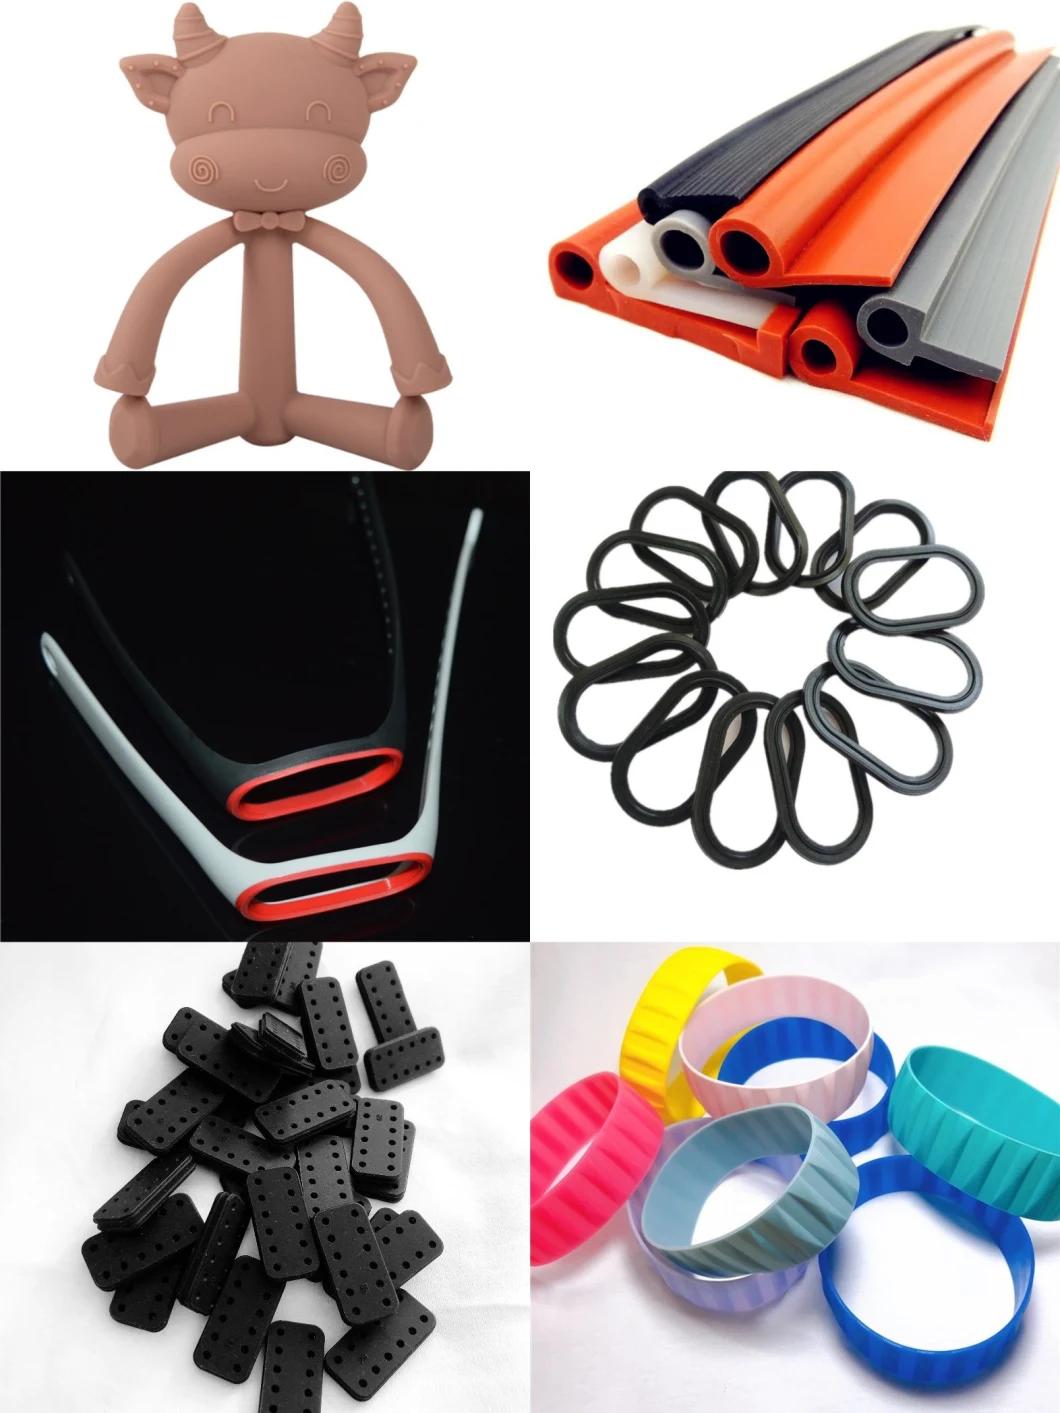 Customizable Silicone Rubber O-Ring Multi-Colored High Quality